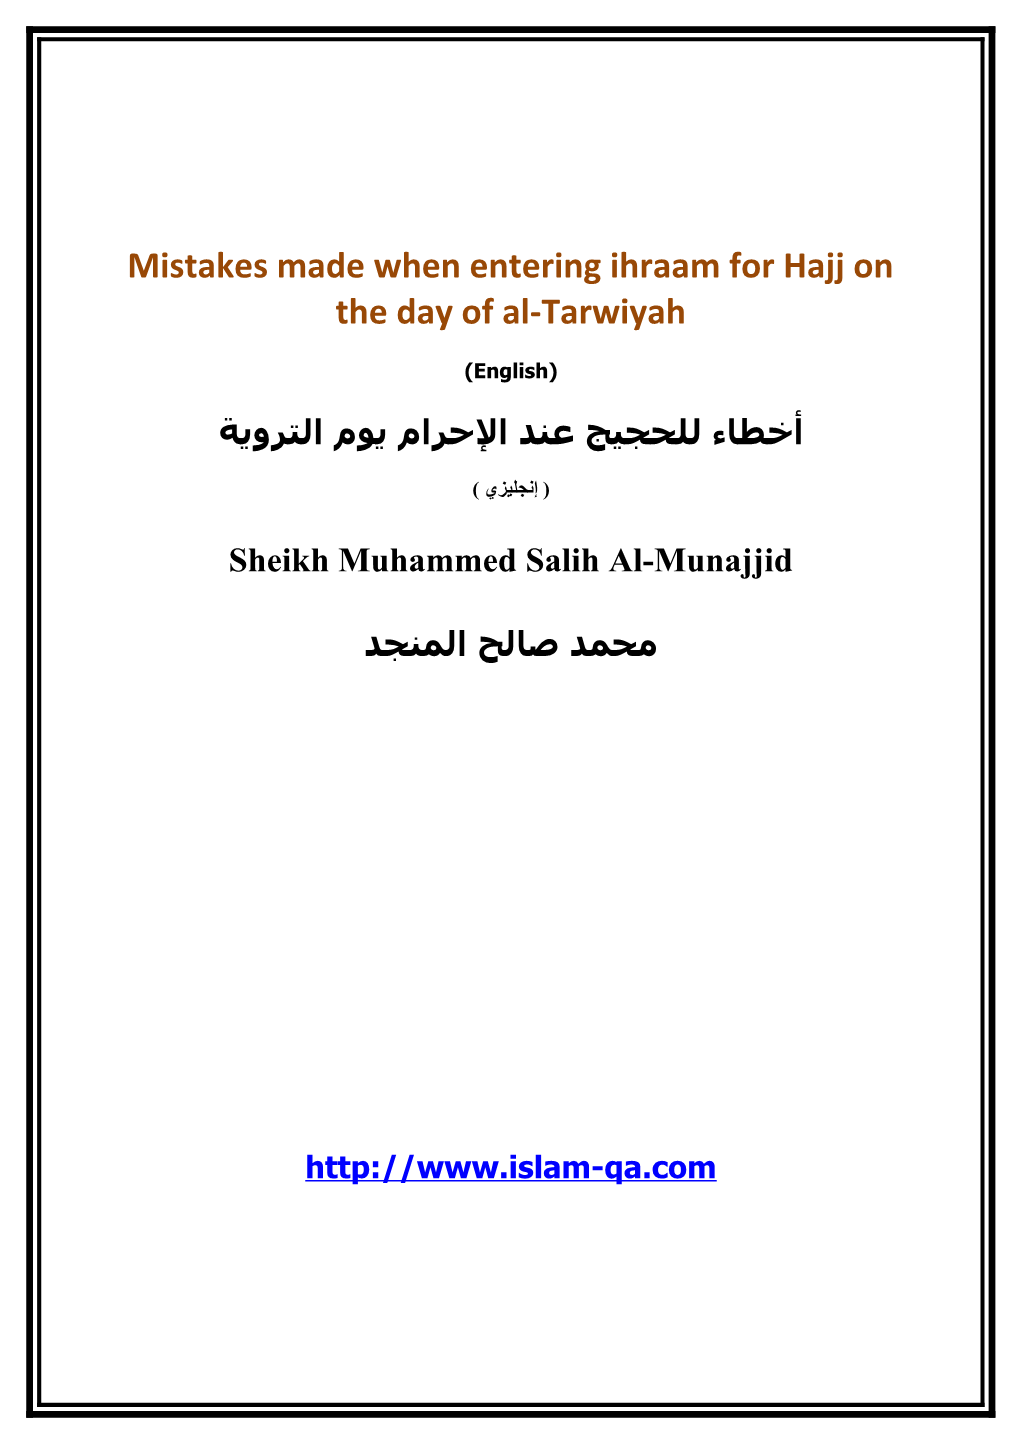 Mistakes Made When Entering Ihraam for Hajj on the Day of Al-Tarwiyah